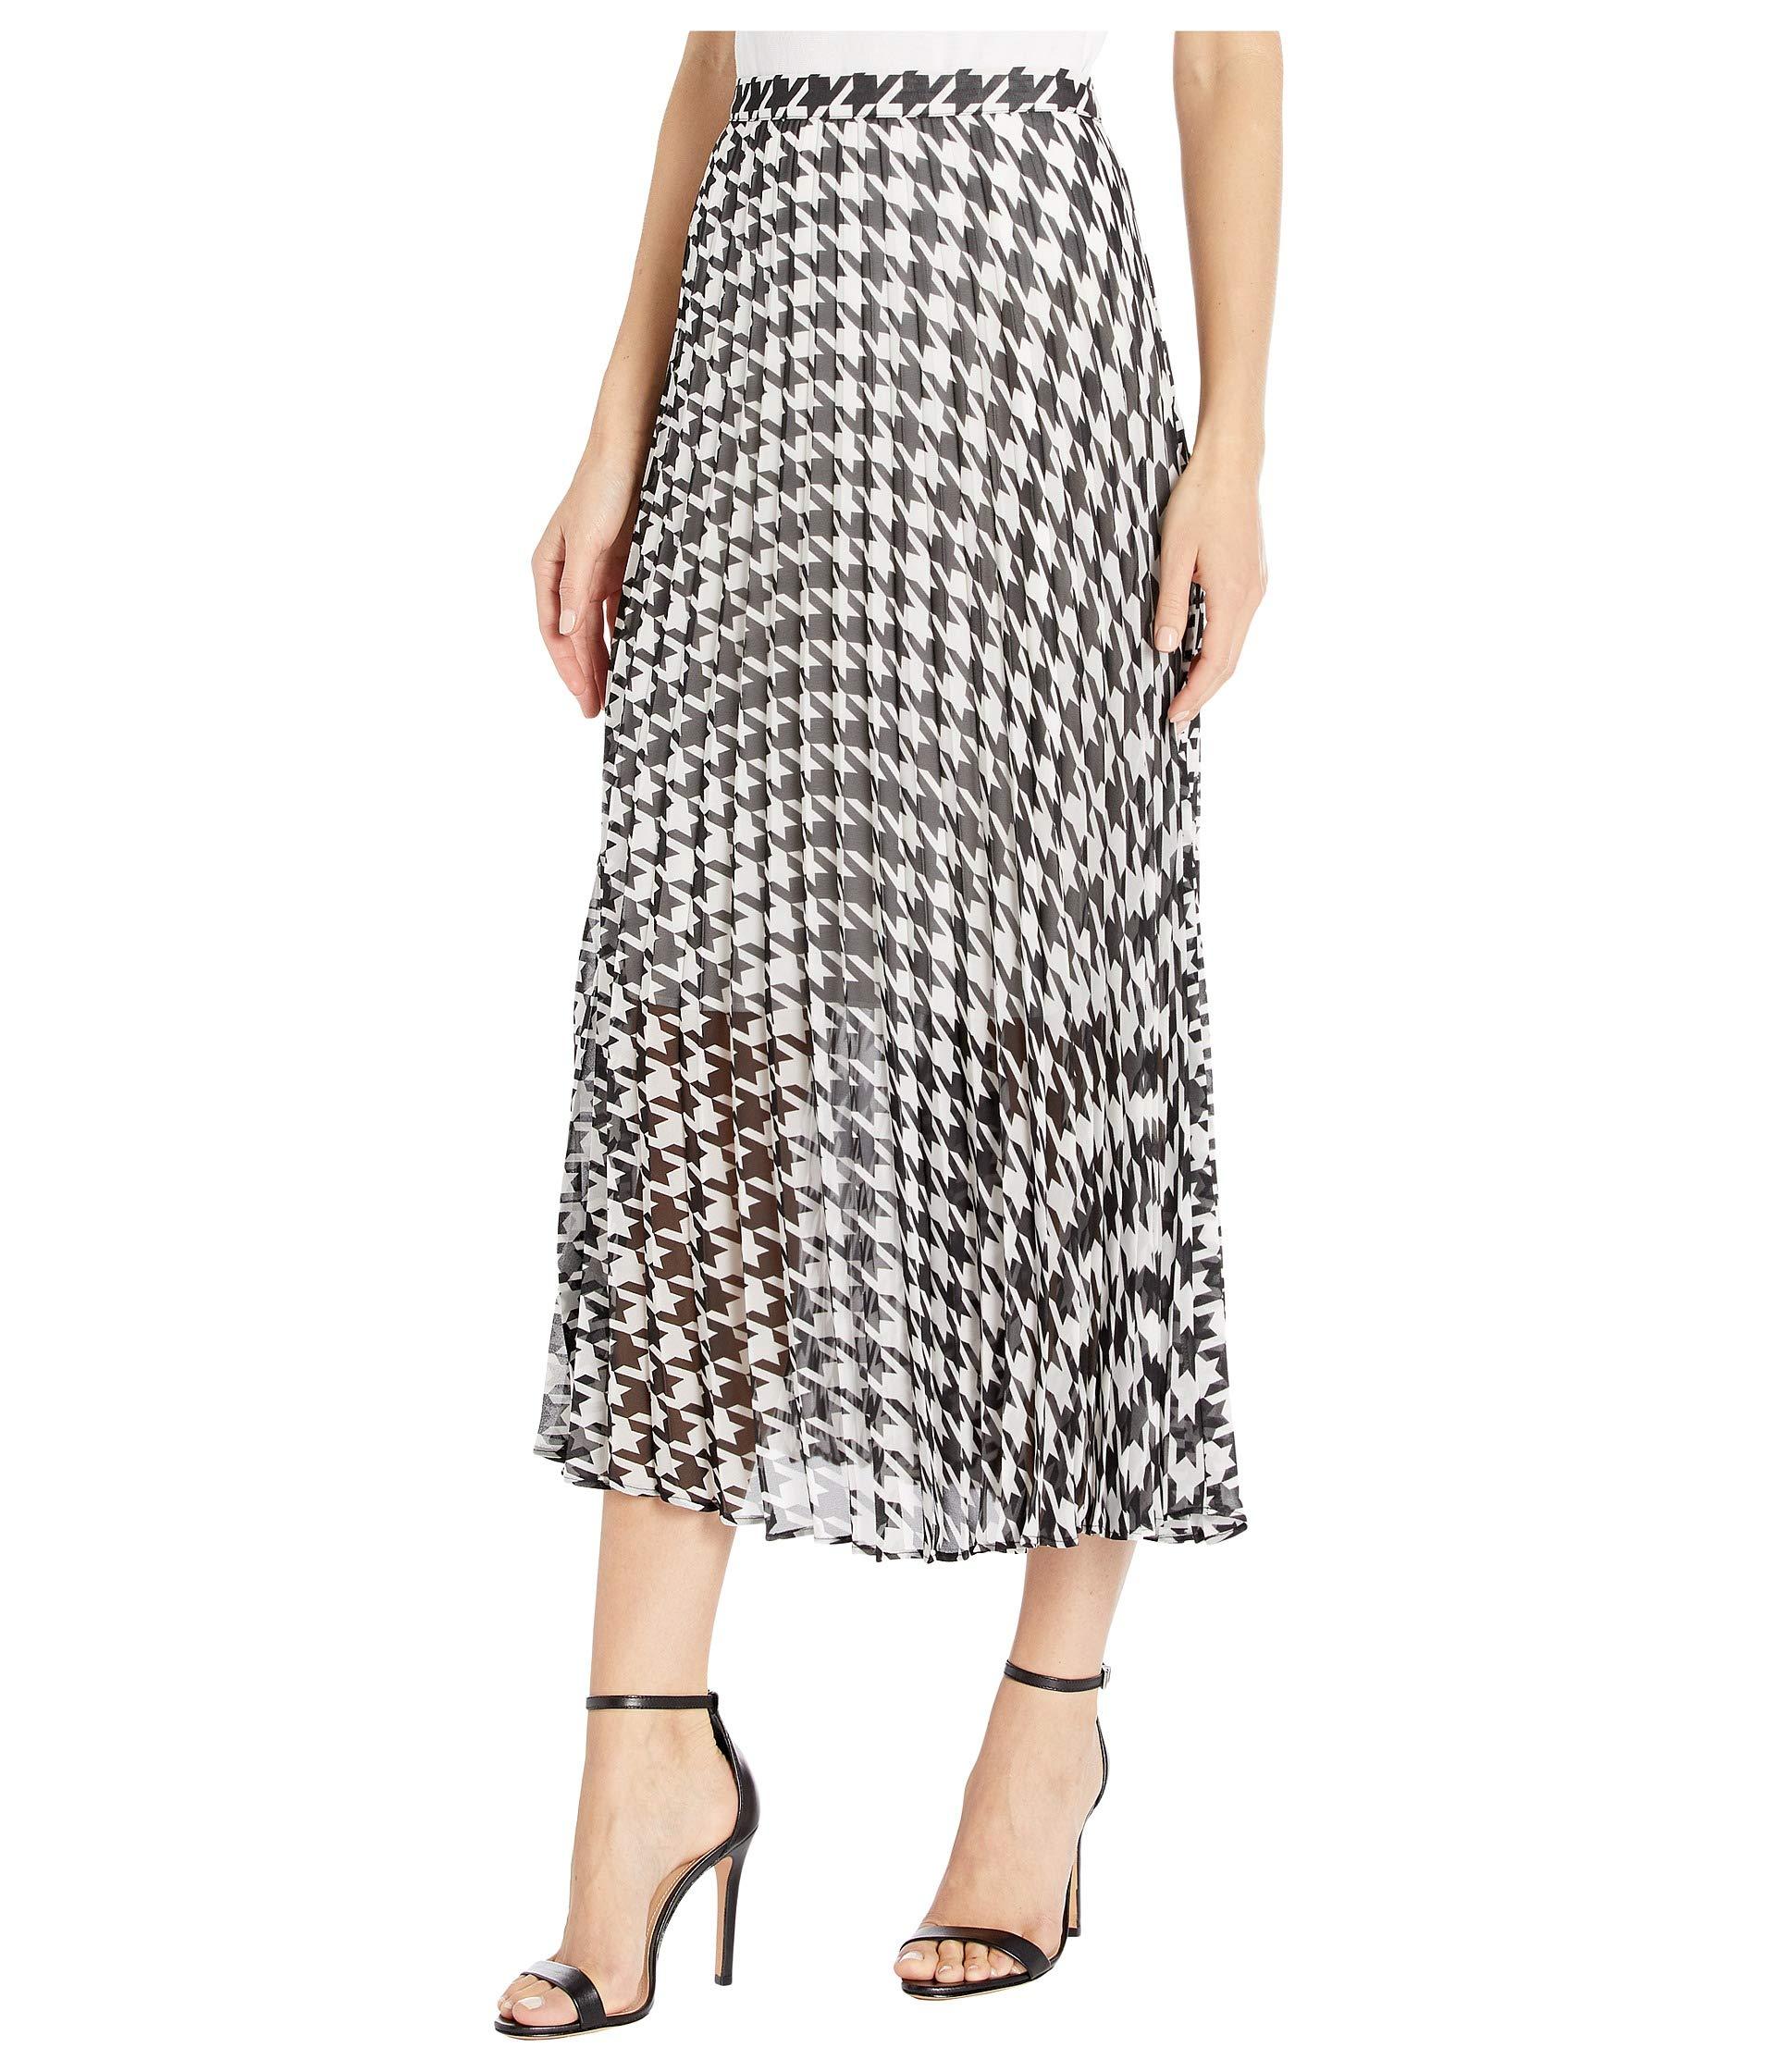 Vince Camuto Synthetic Houndstooth Pleated Midi Skirt in Black - Lyst